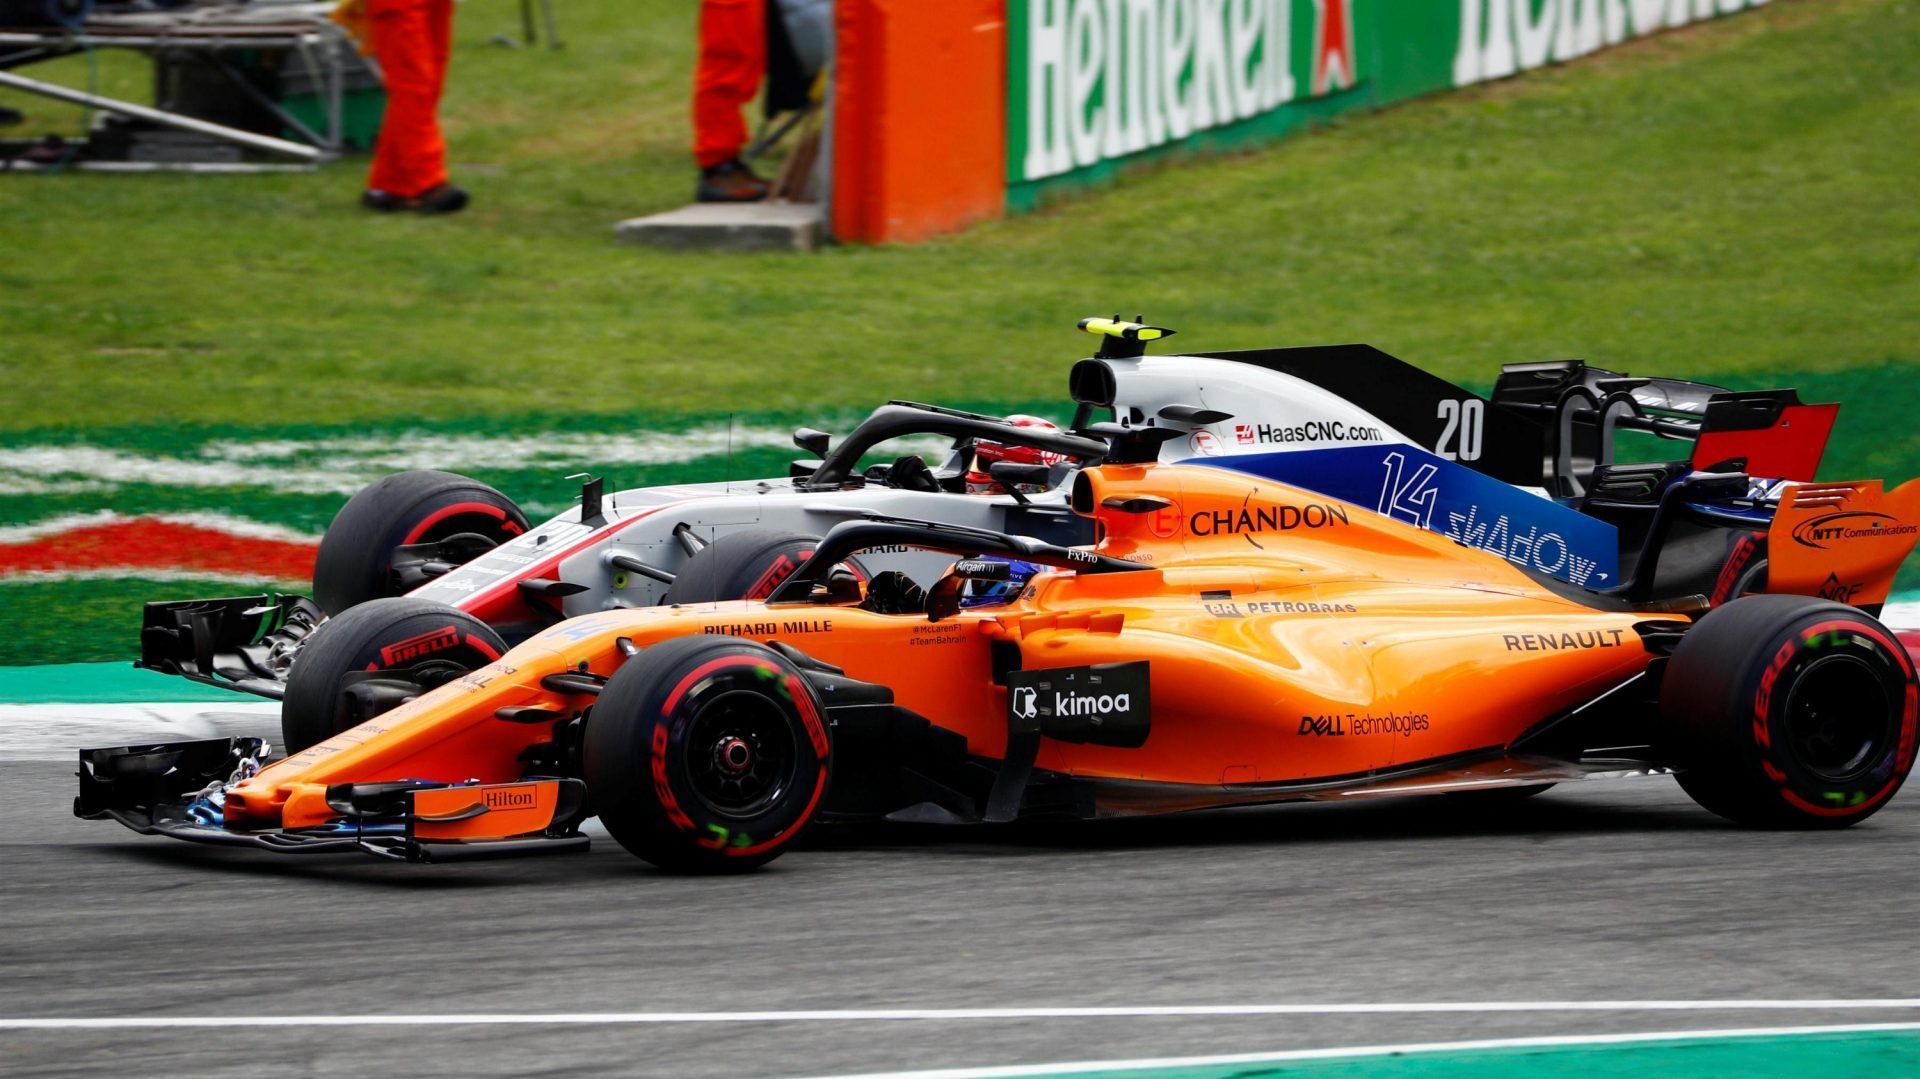 Steiner Brown At Odds On Magnussen Alonso Italian Gp Incident